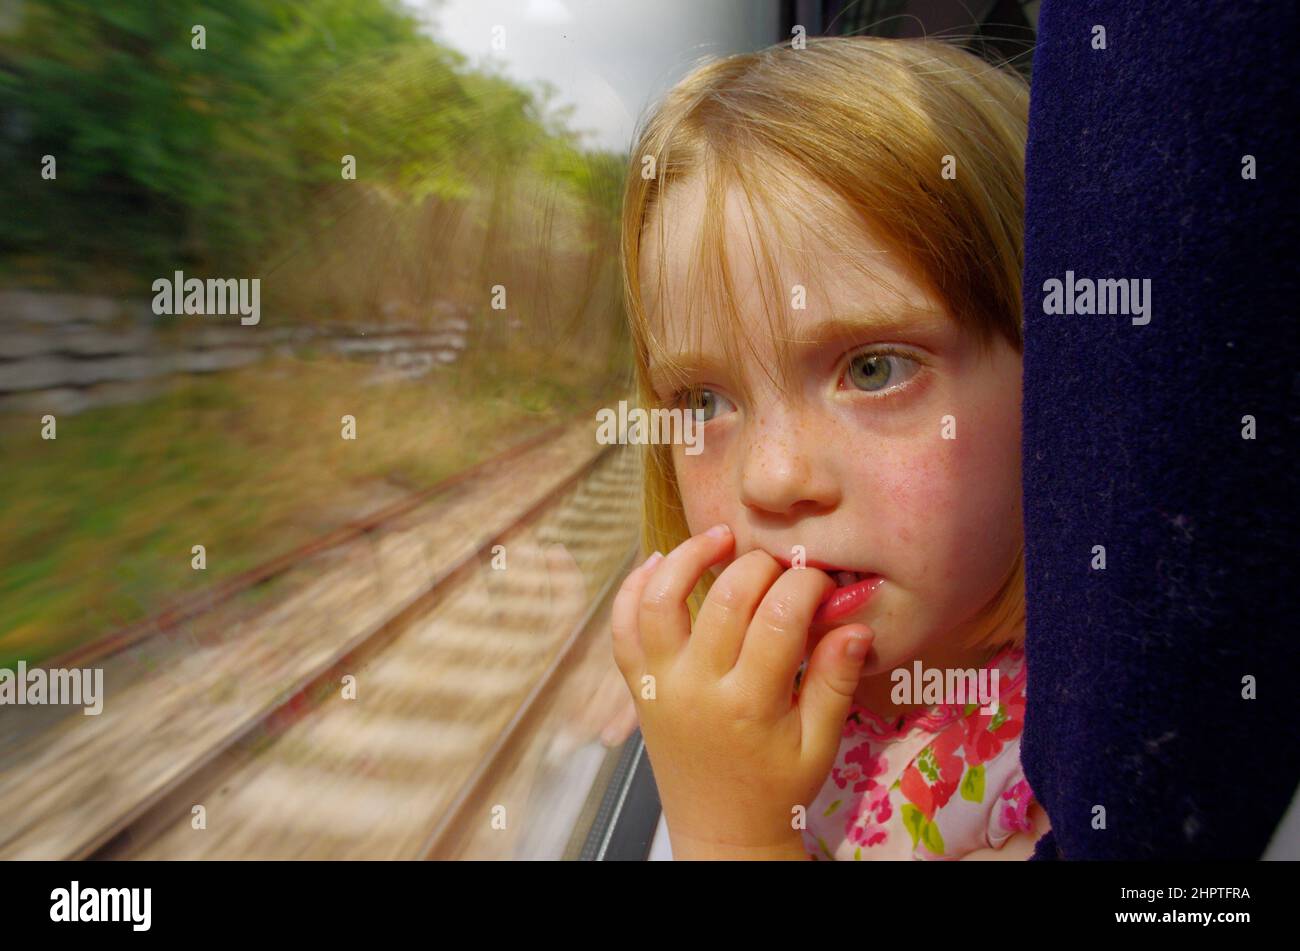 Sad child on train, looking out the window Stock Photo